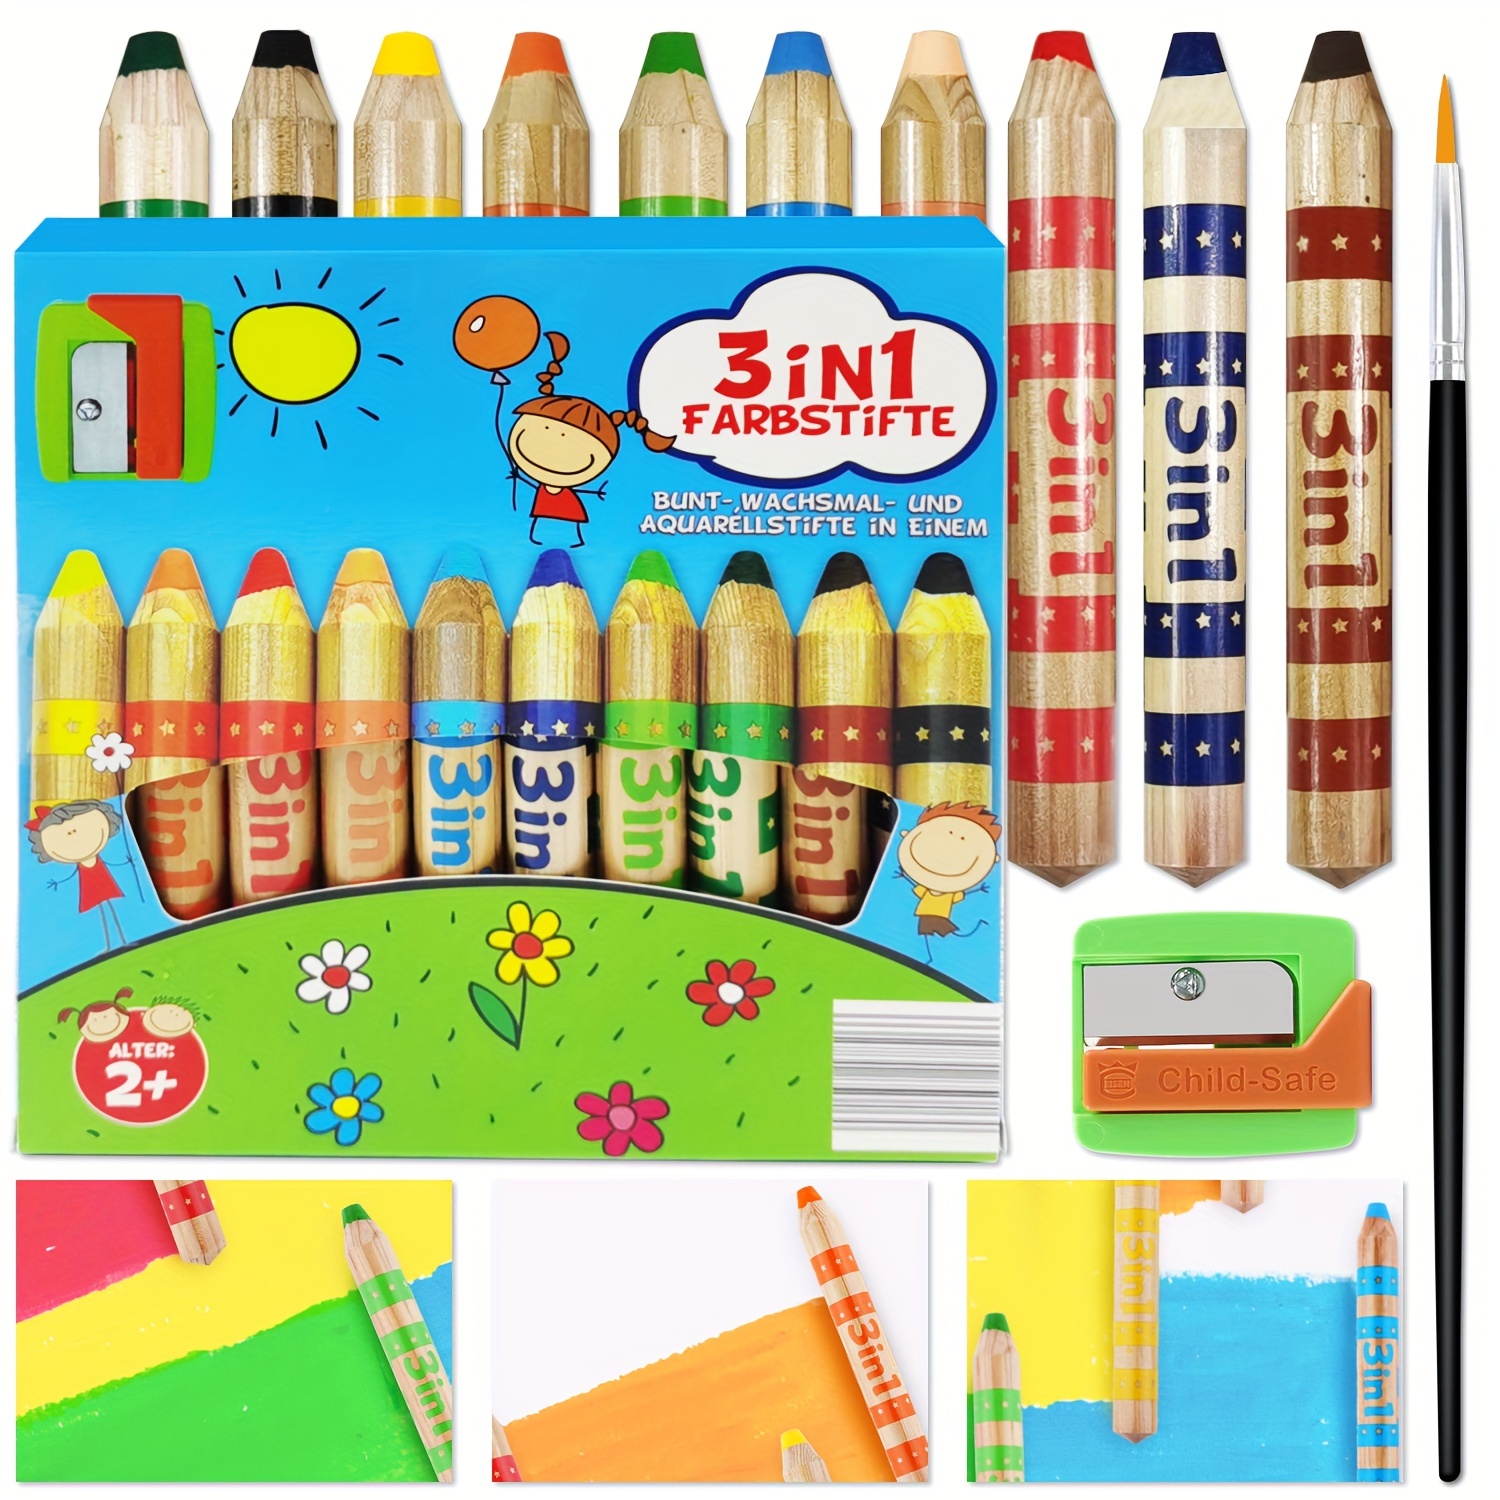 Large Pencils Large Giant Gift Pencils Student Party Gifts - Temu